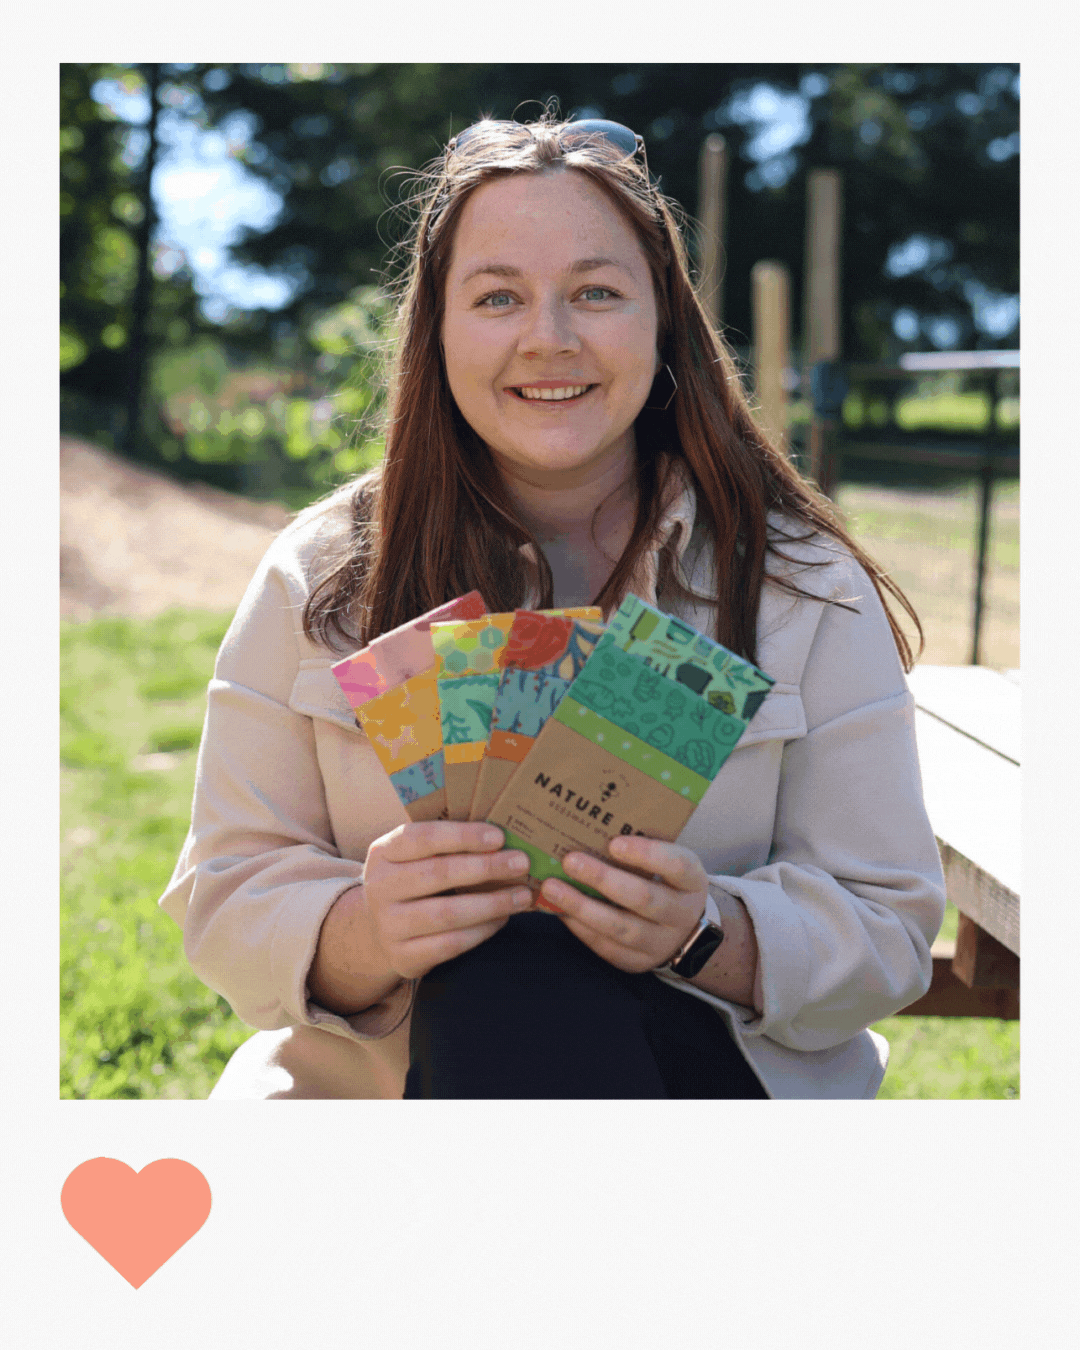 polaroid instagram image of a girl holding bright and colourful beeswax wrap sets from nature bee beeswax wraps